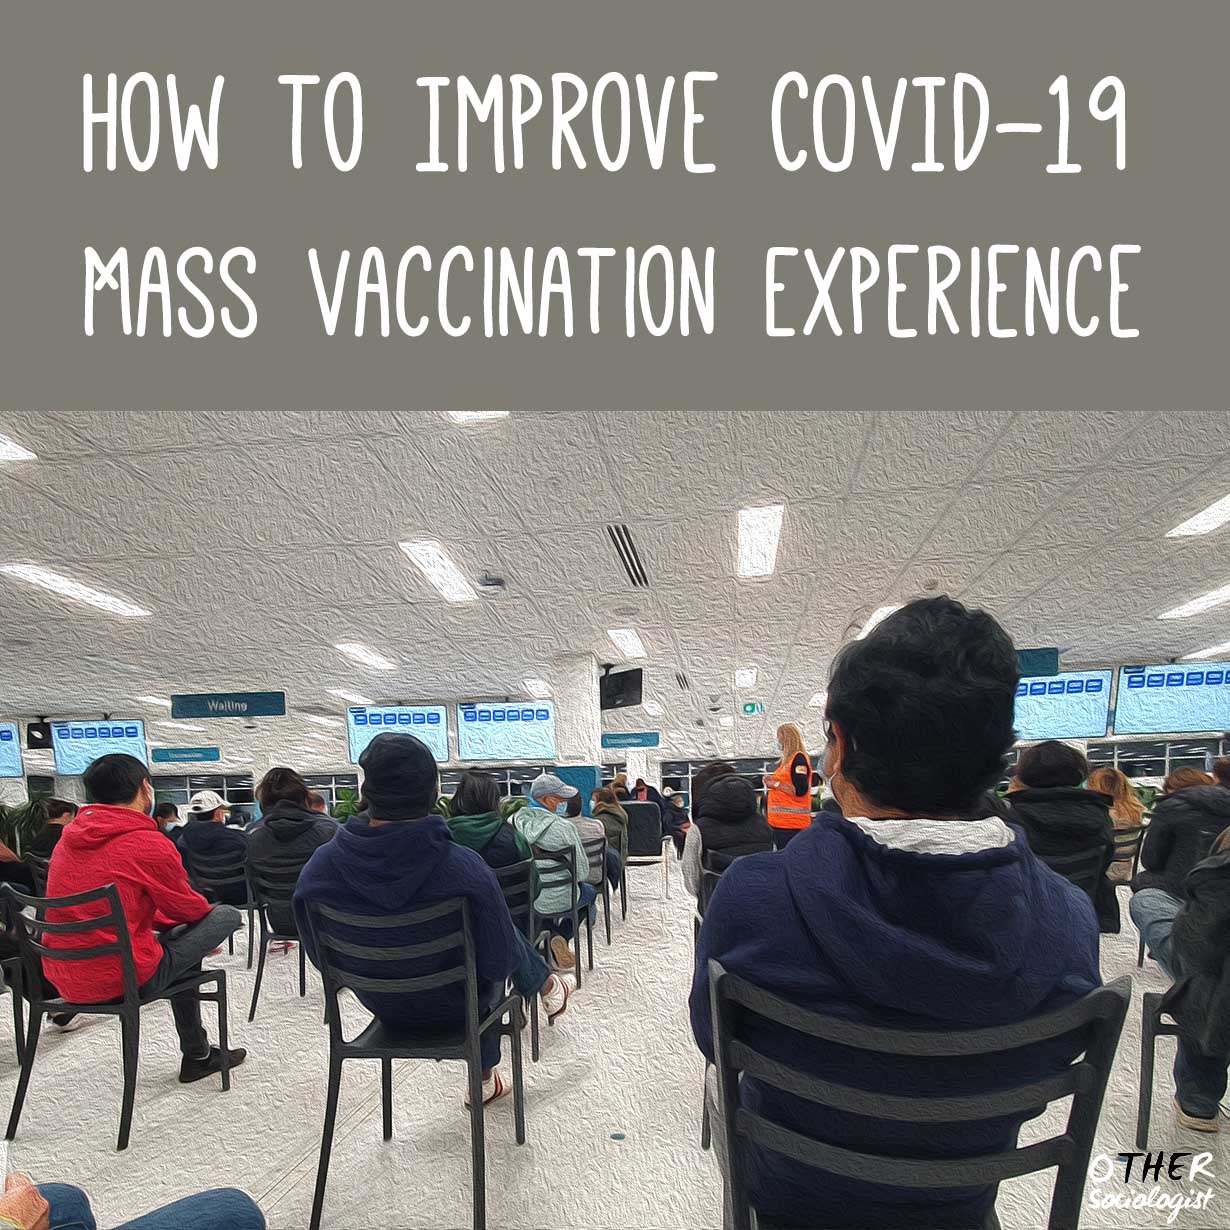 How to Improve COVID-19 Mass Vaccination Experience